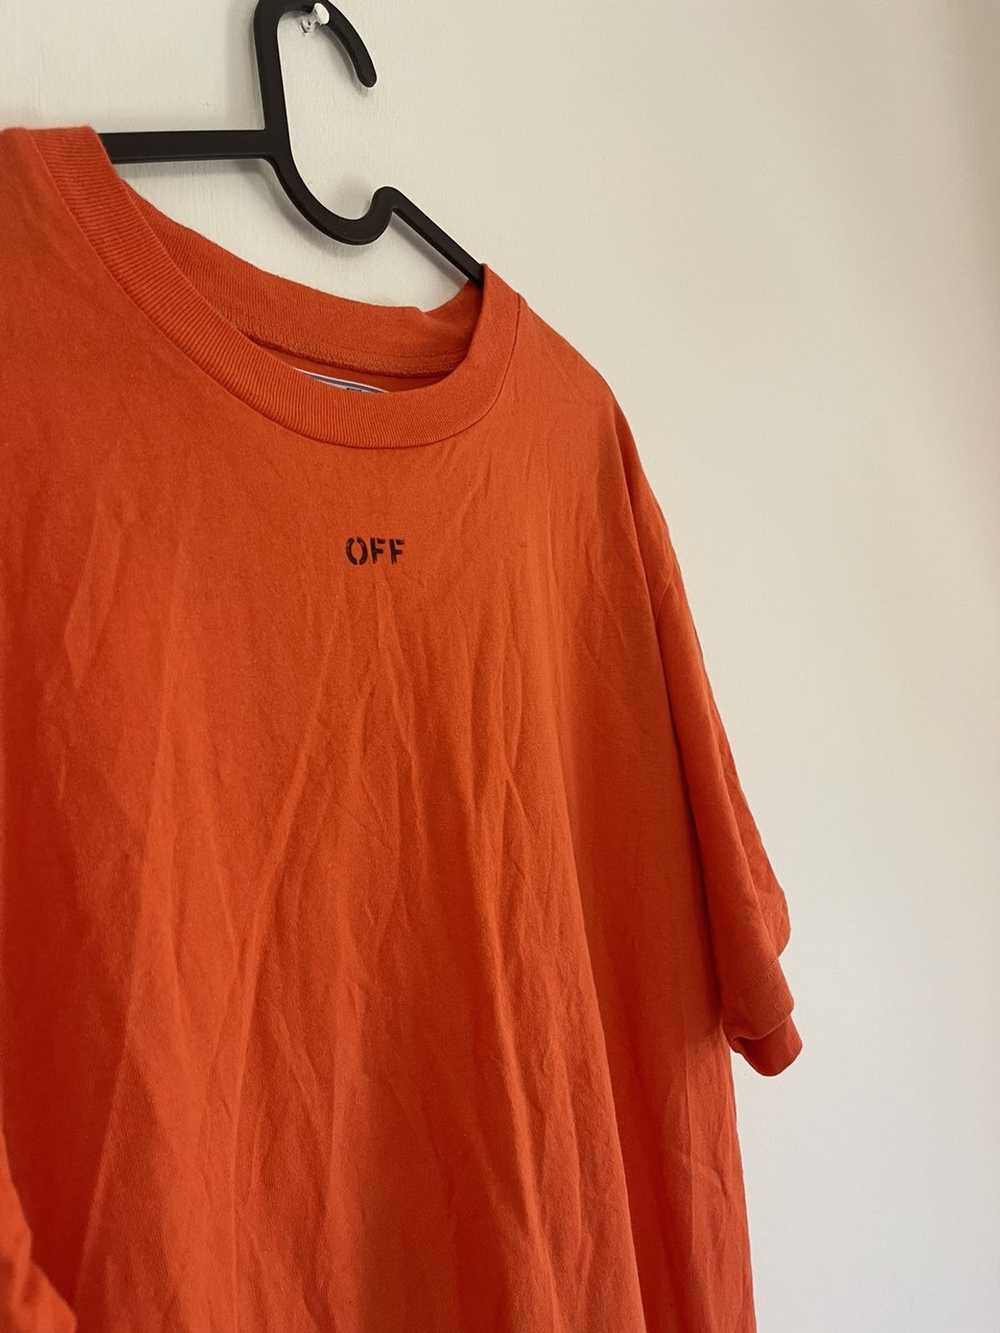 Off-White Off white SS20 Stencil Arrow TEE - image 5